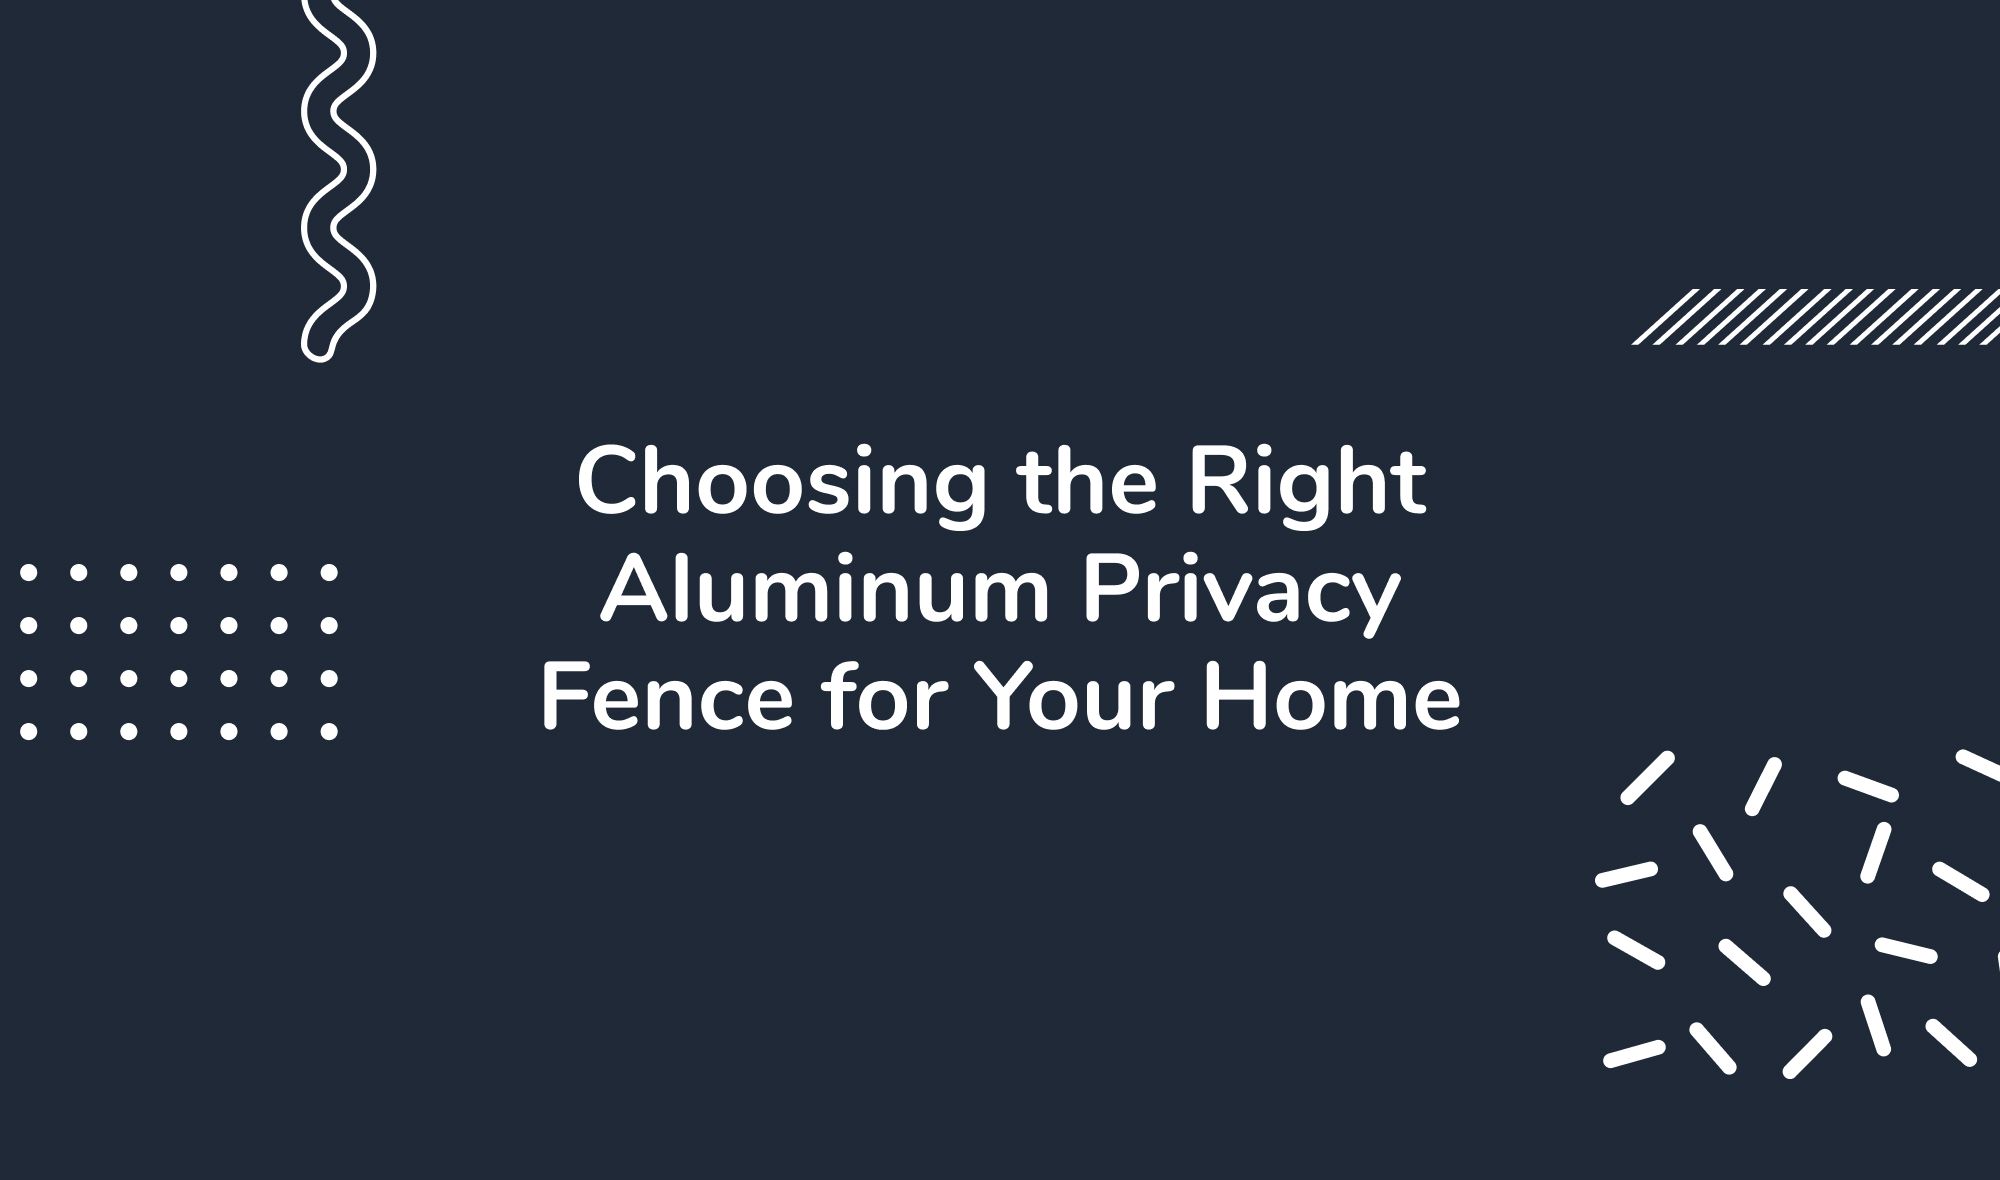 Choosing the Right Aluminum Privacy Fence for Your Home